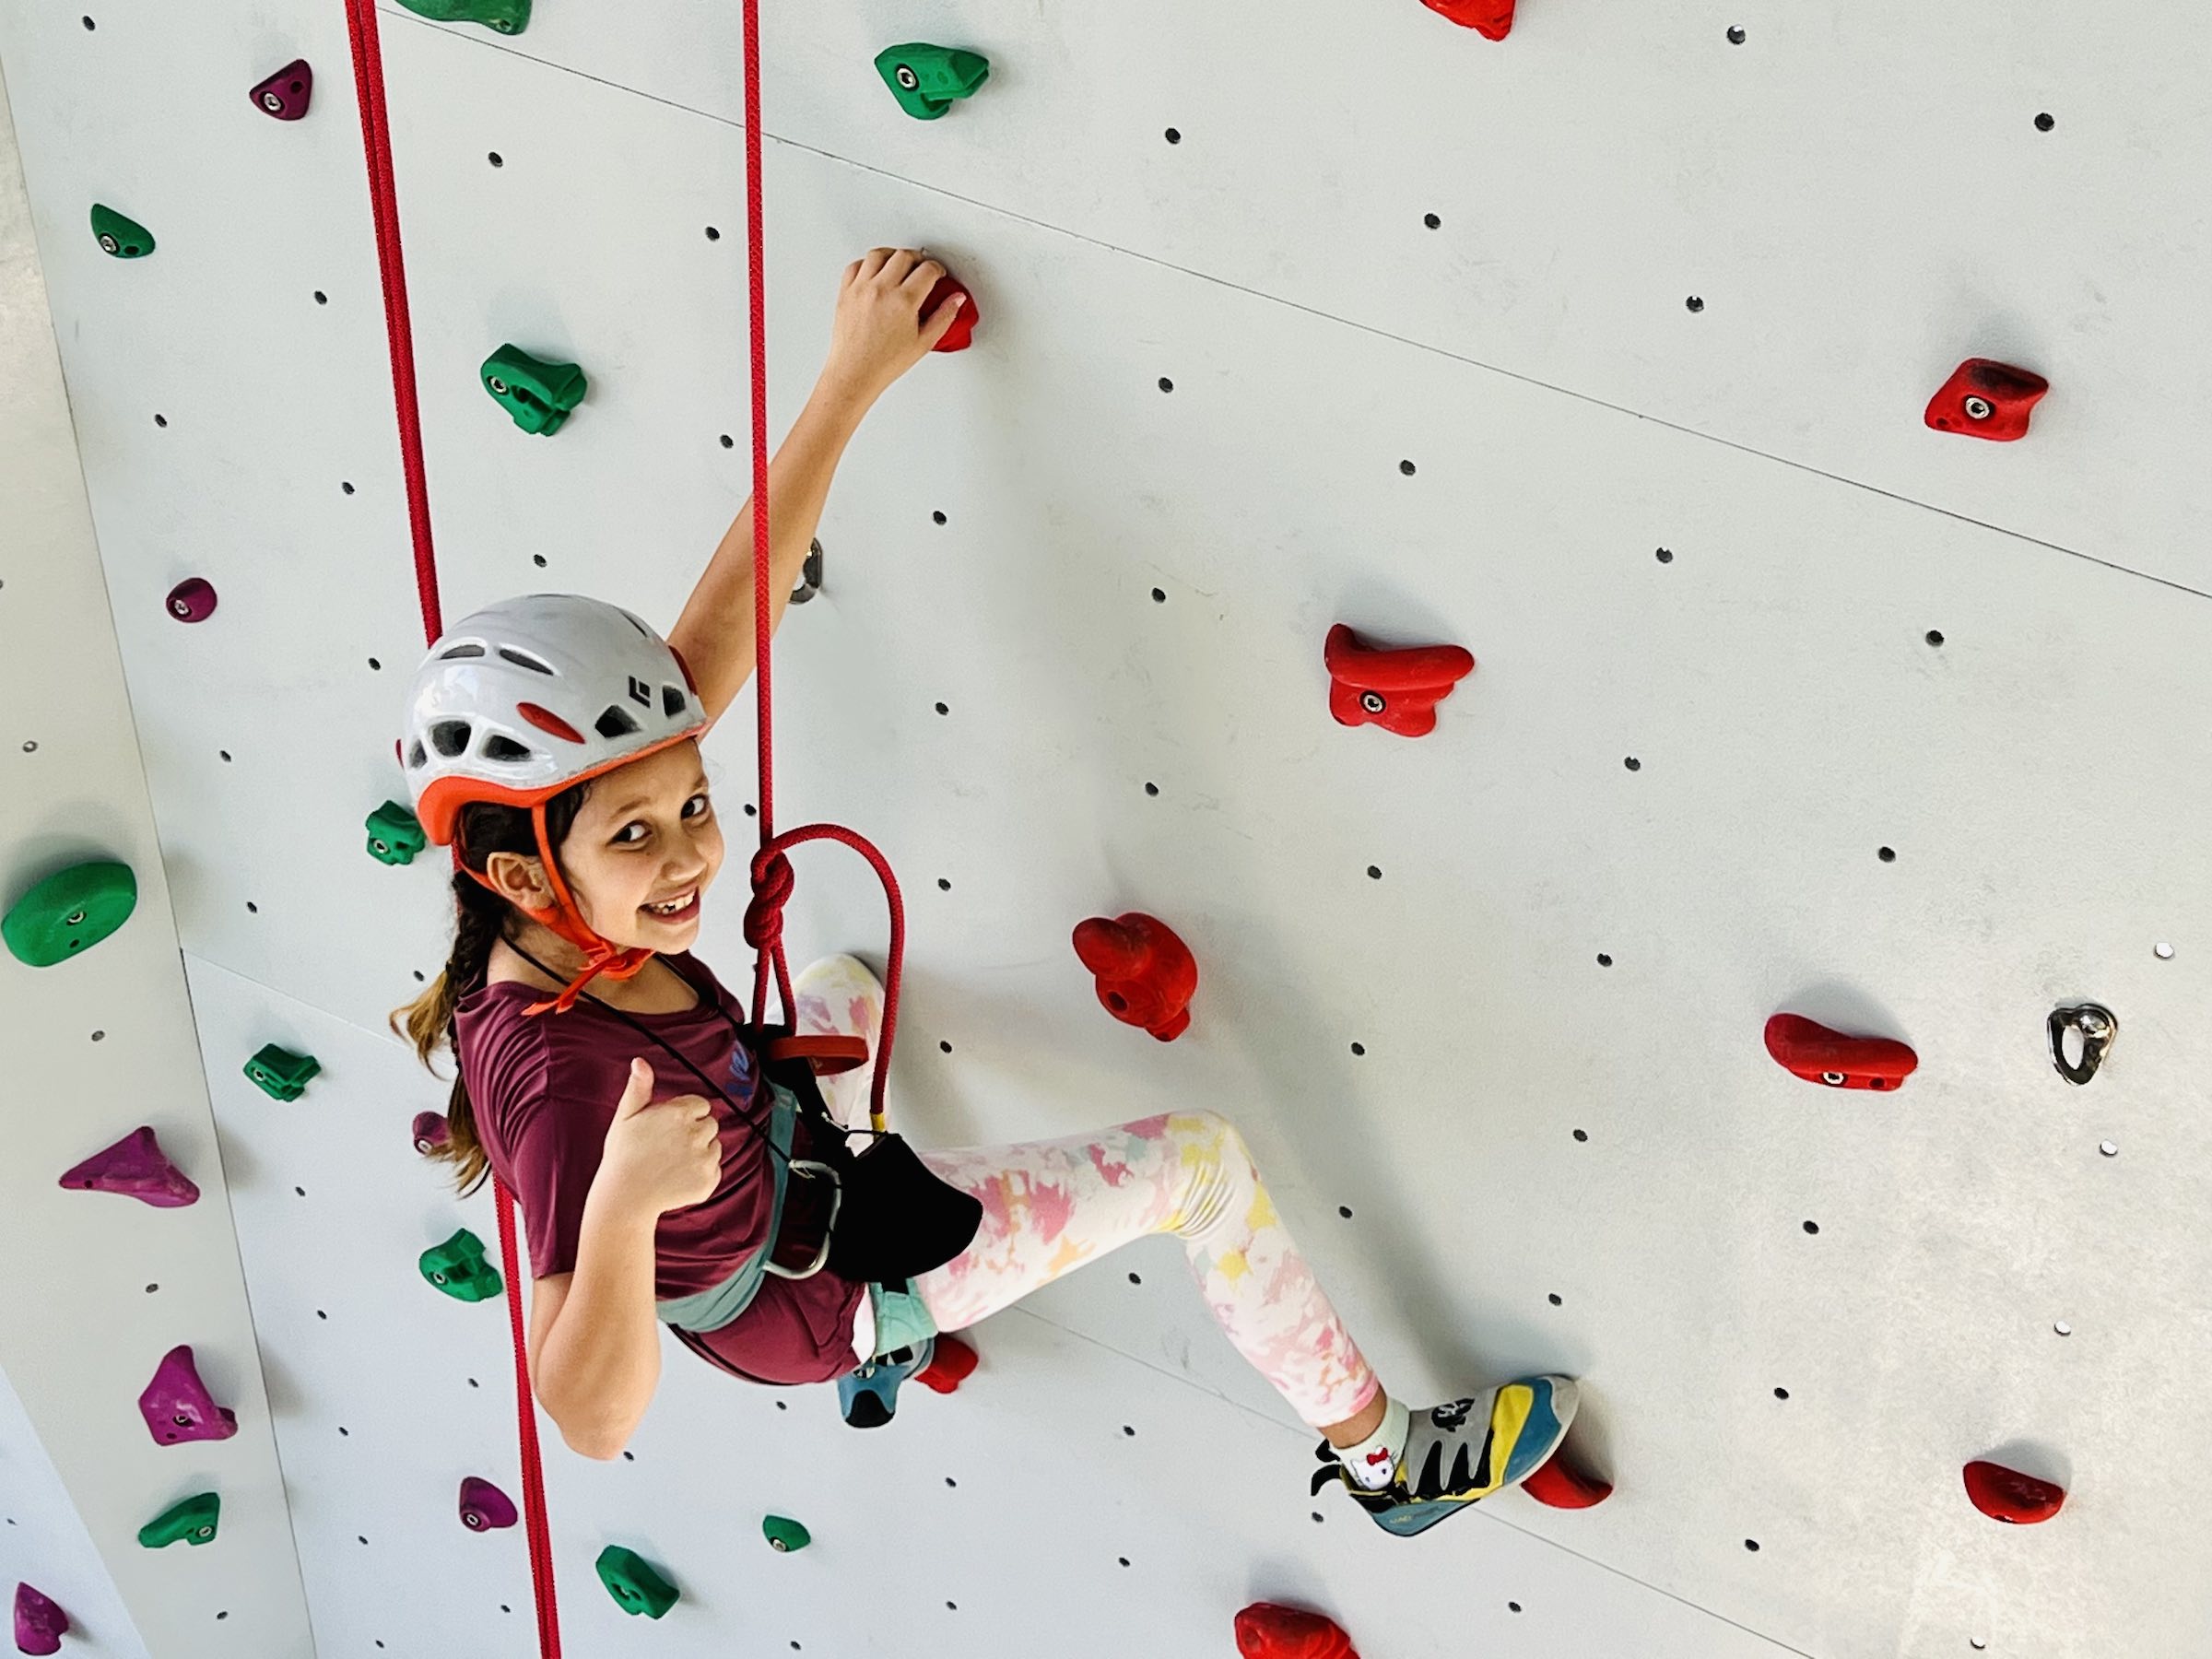 Youth enjoying climbing at Progression Climbing and Vertical Sports Center in Chiang Mai Thailand